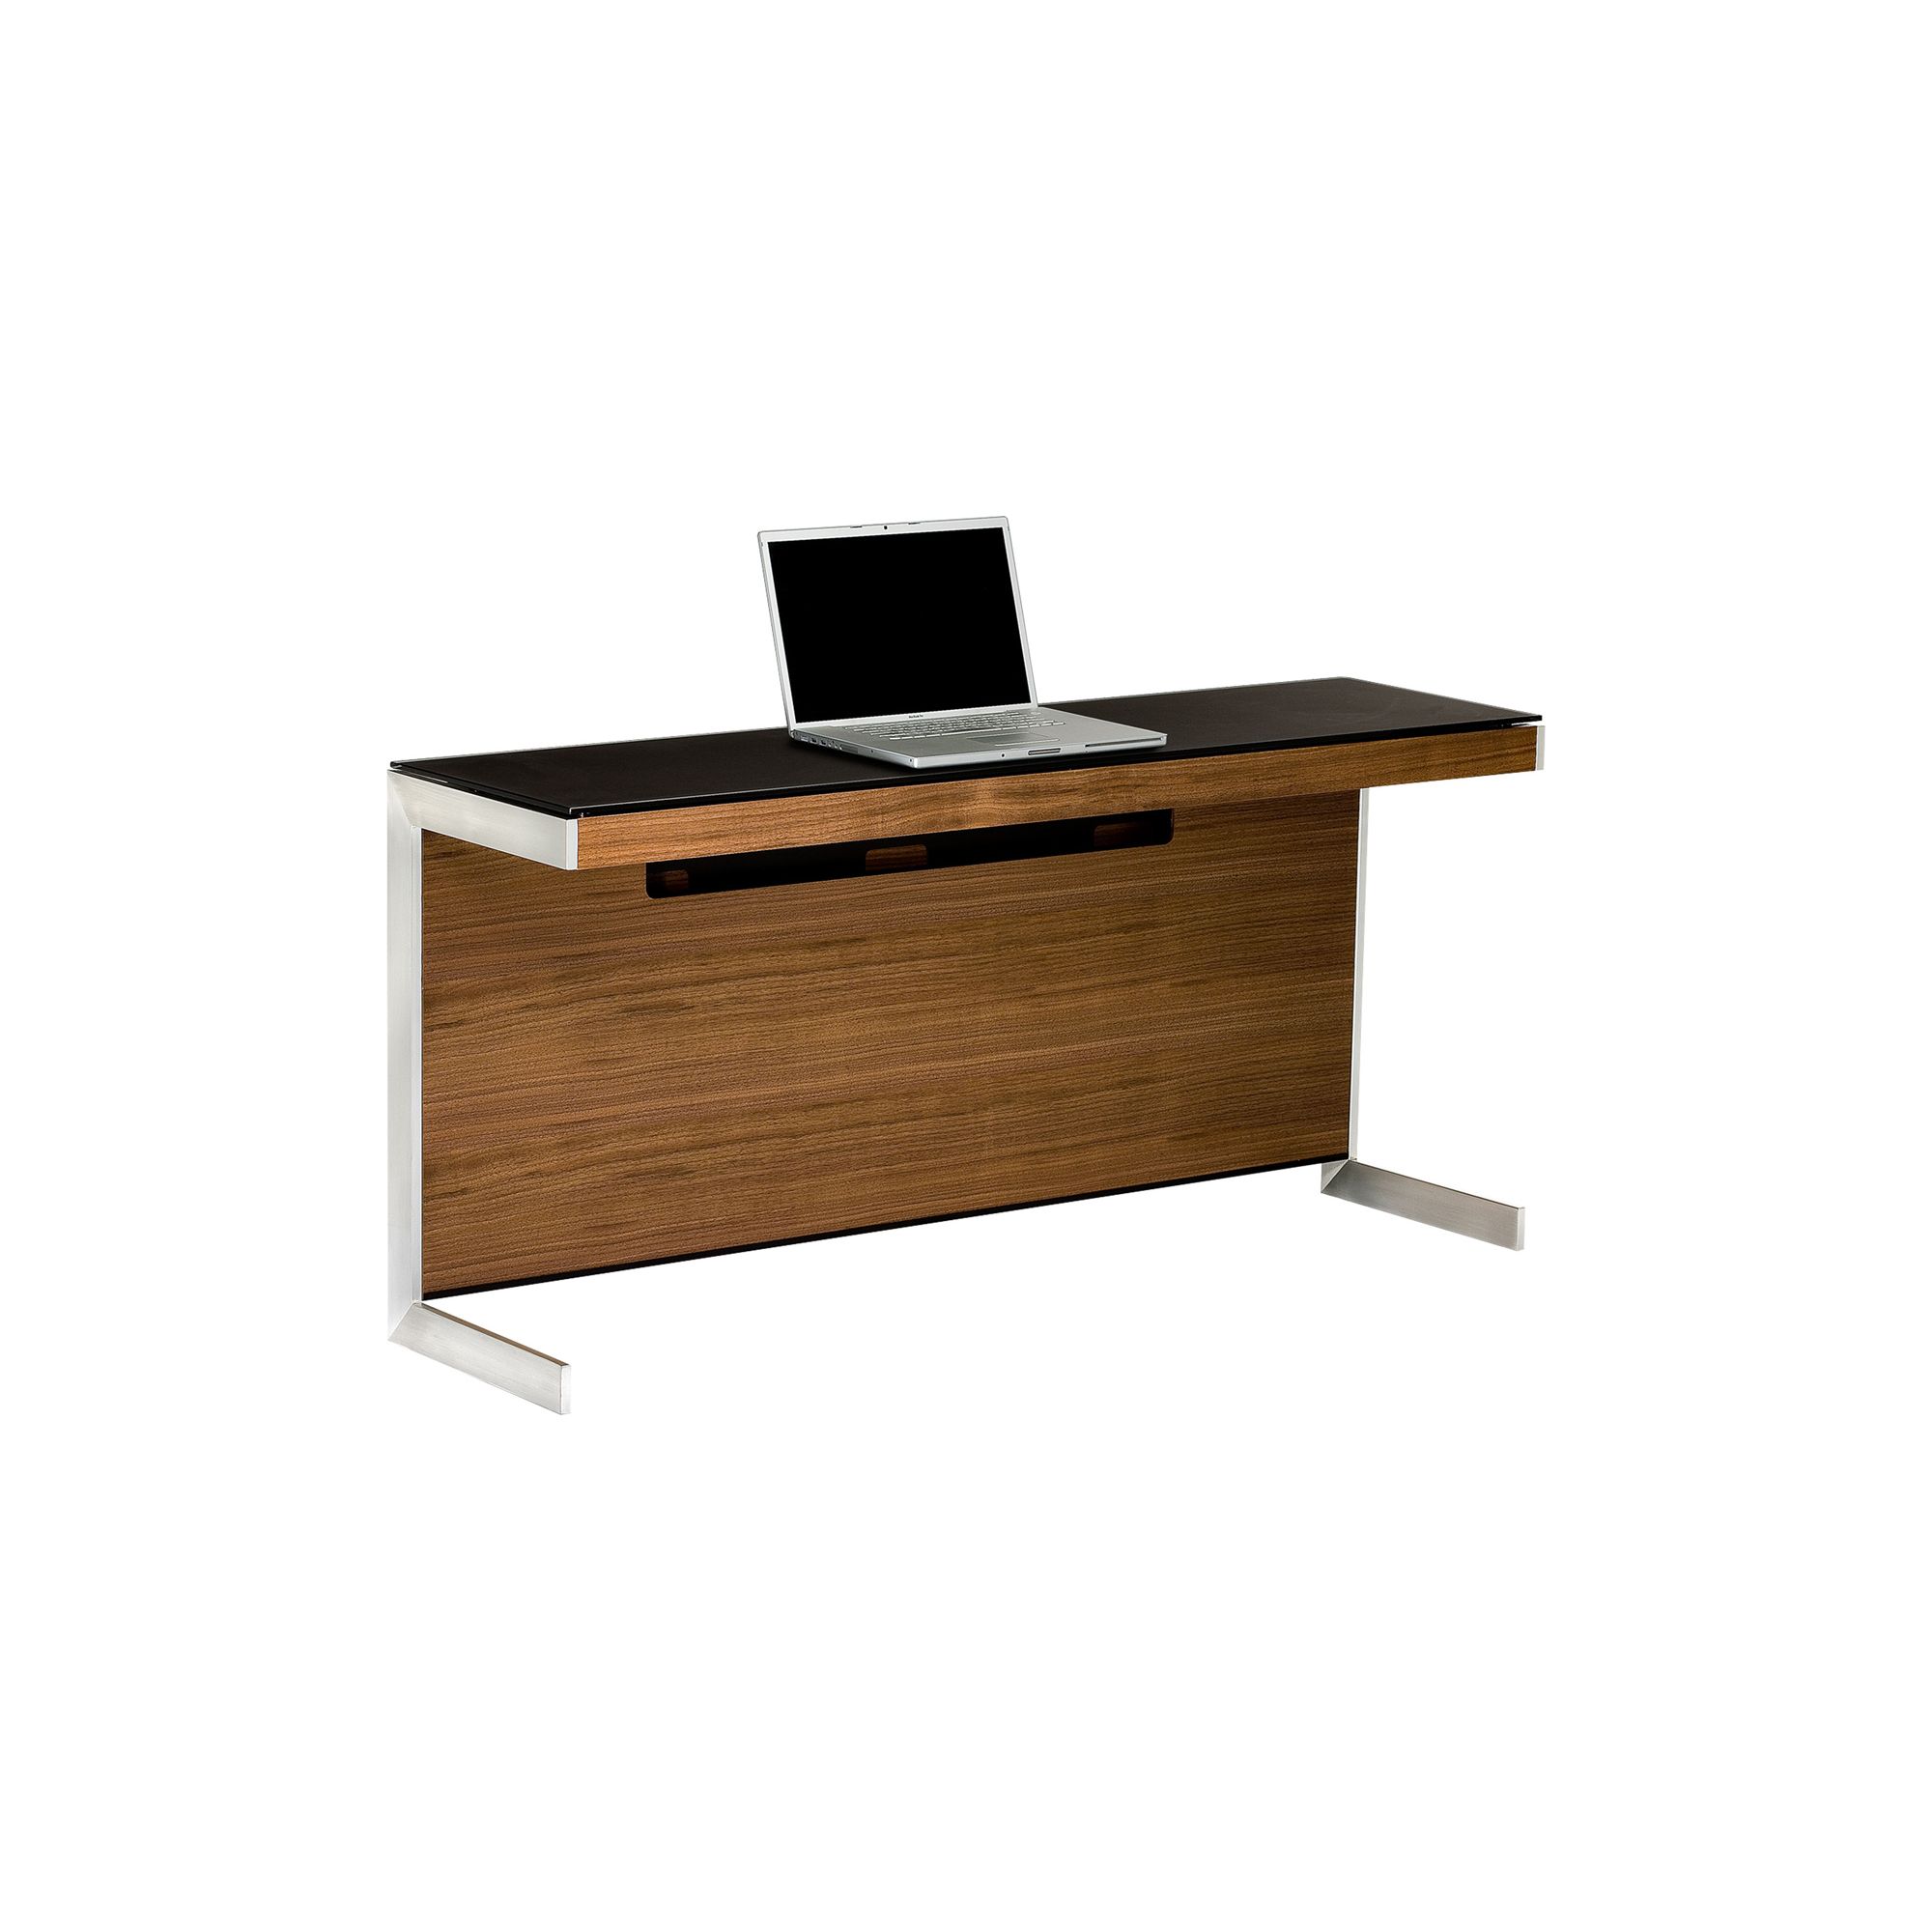 Sequel 6002 Desk in Natural Walnut with Glass Top at Tescos Direct